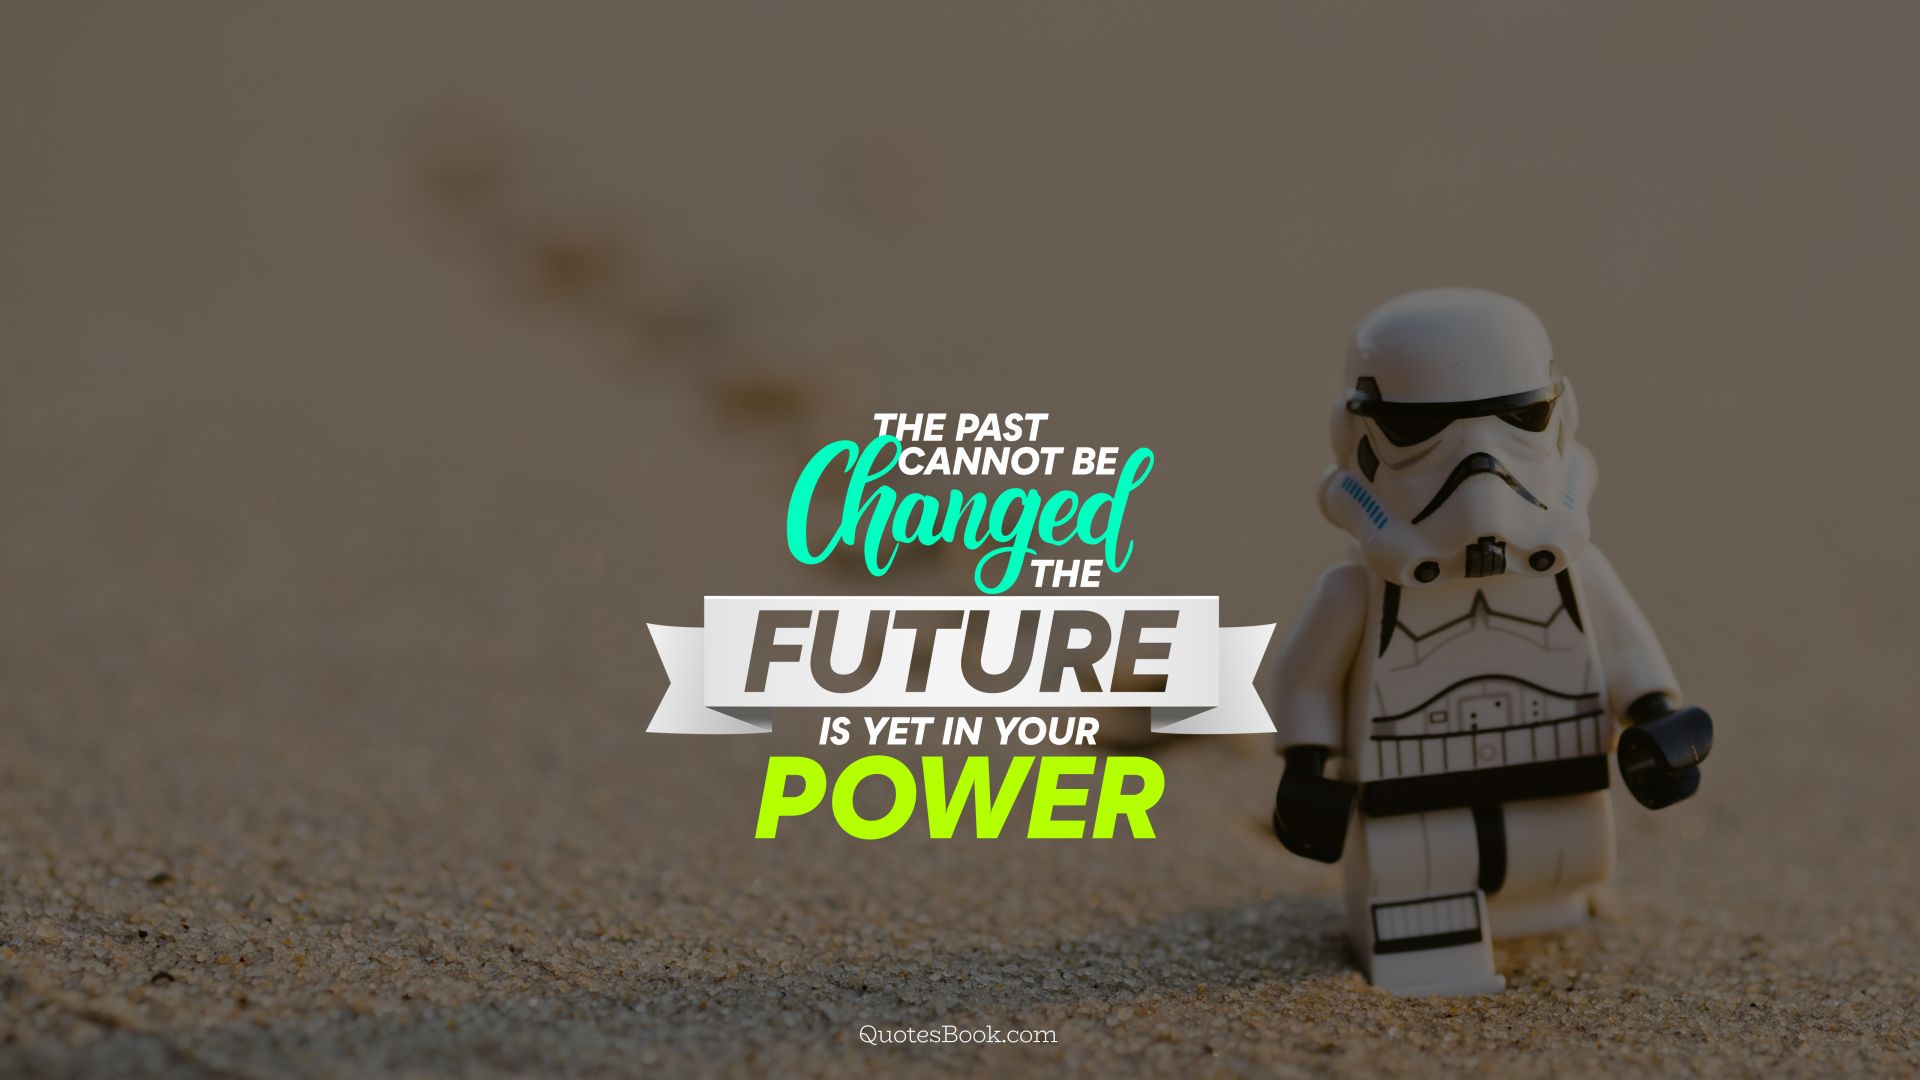 The past cannot be changed the future is yet in your power. - Quote by H. Jackson Brown, Jr.